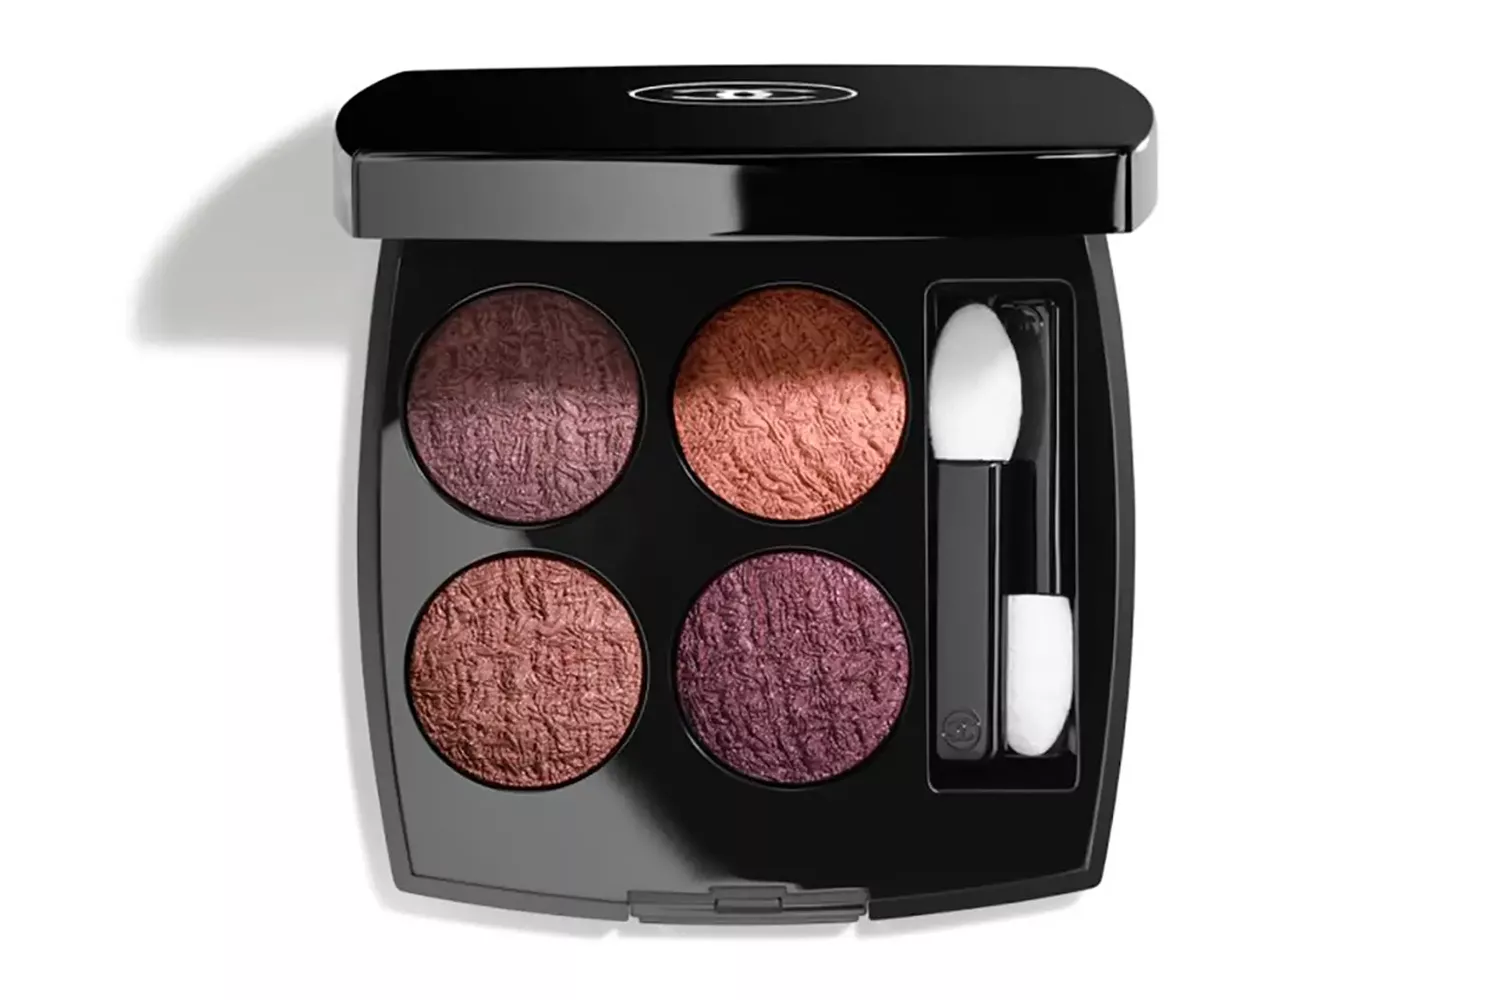 Chanel Les 4 Ombres Tweed Limited Edition Multi-Effect Quadra Eyeshadow Palette